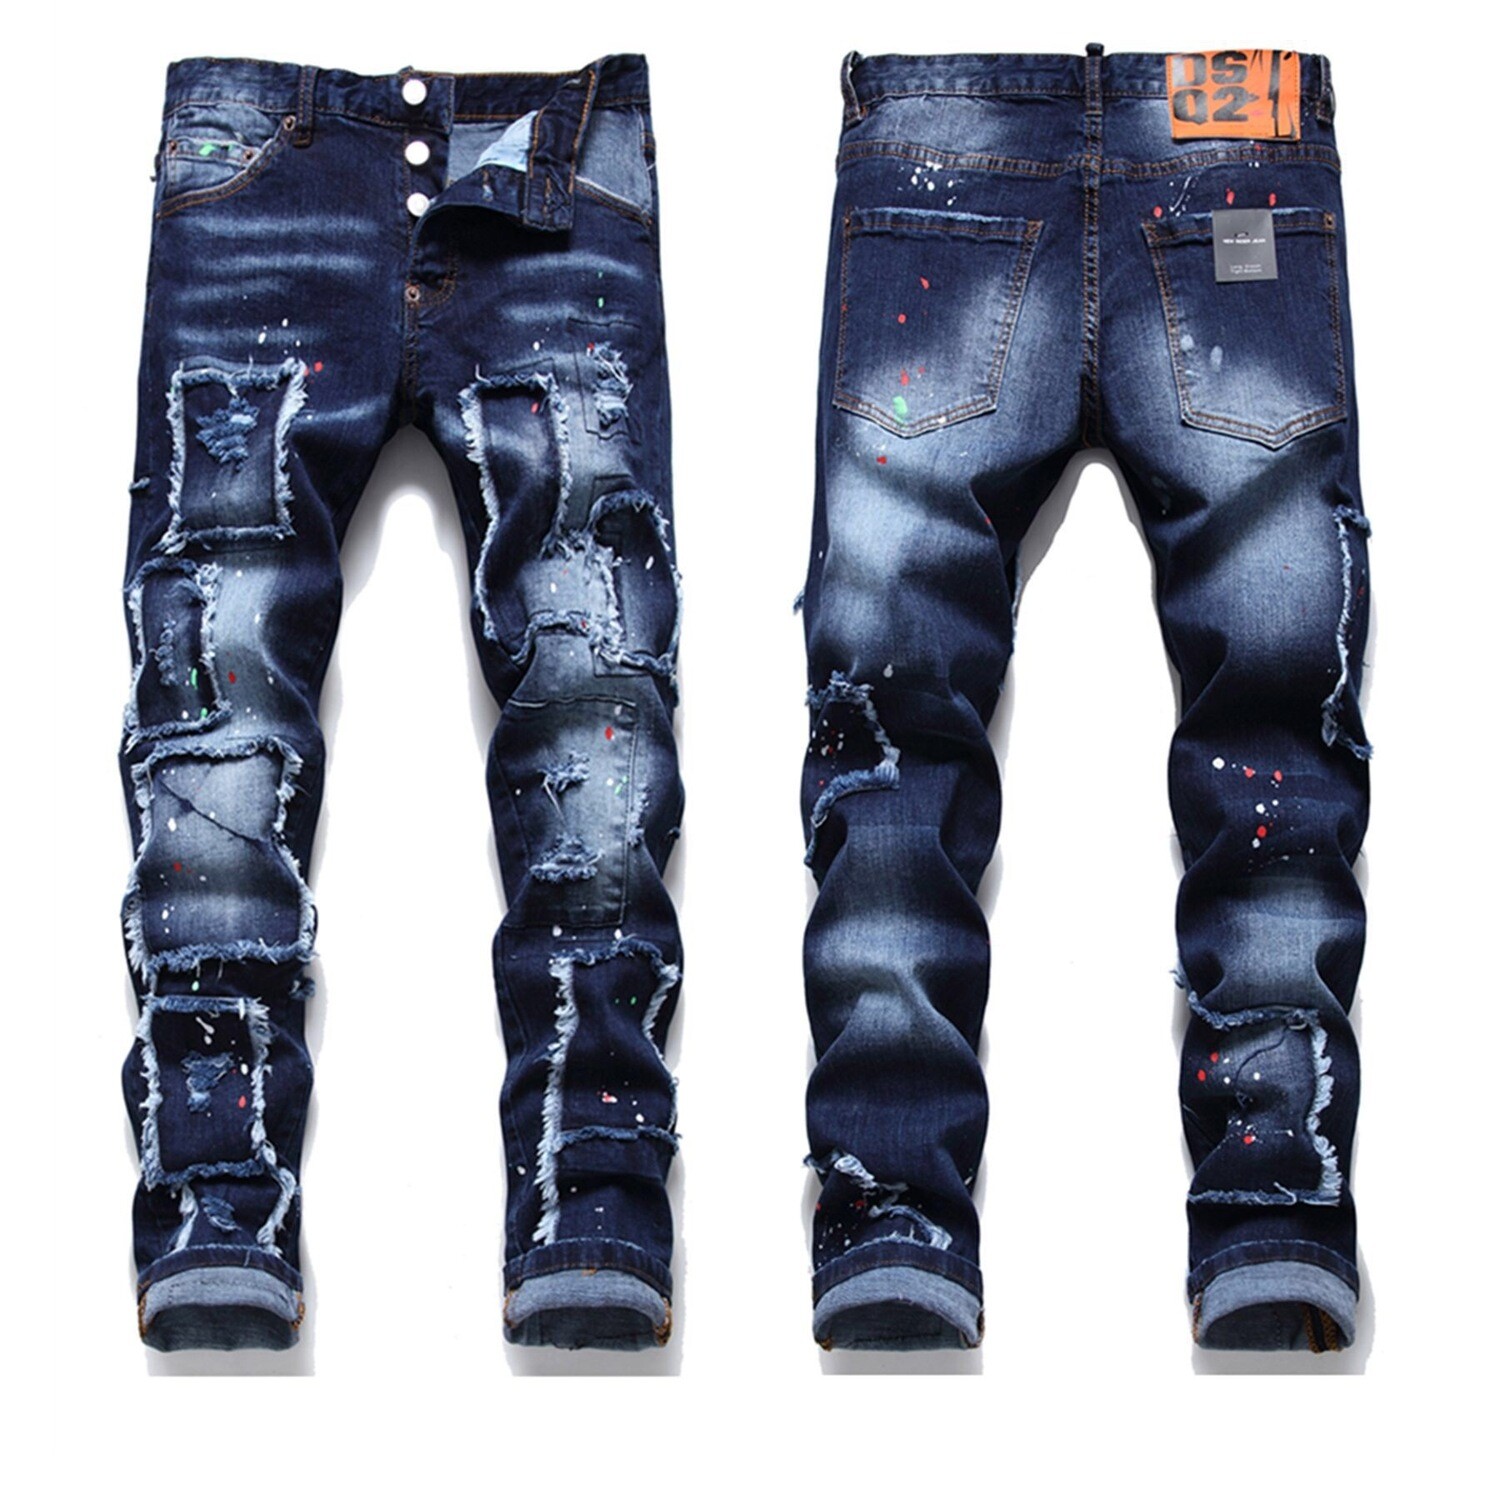 heavyweight mens big and tall jeans cattle homme slim ultra stretch jeans luxury fashion hiphop men ripped jeans